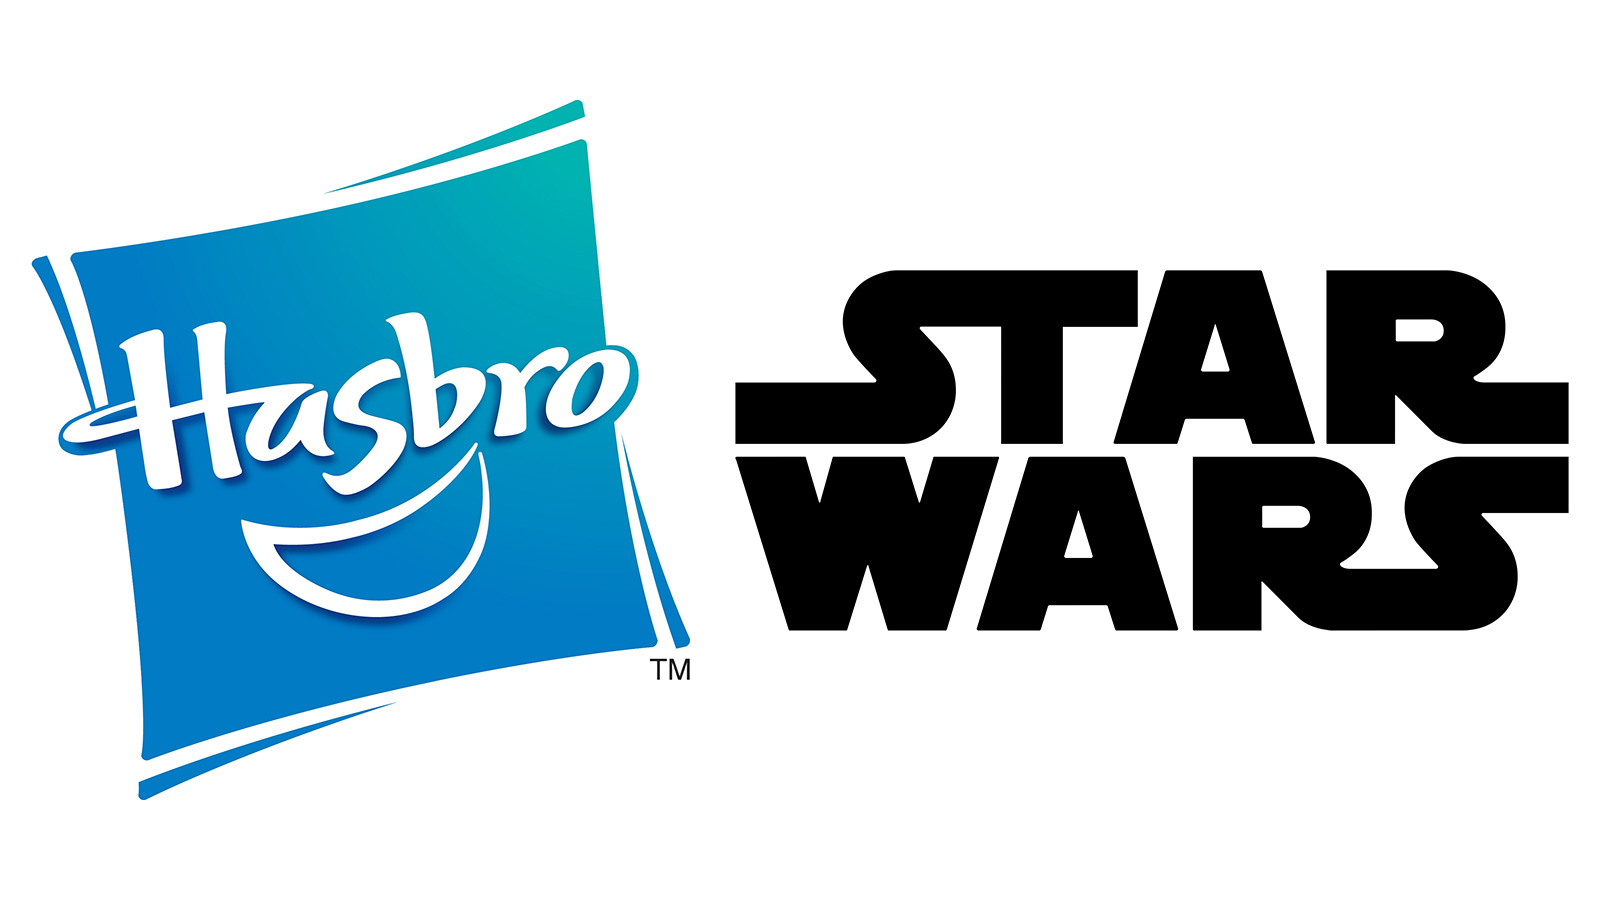 List Of Hasbro Star Wars Preorders That Go Live 7/23 At 5pm ET - Links Will Be Added When Available